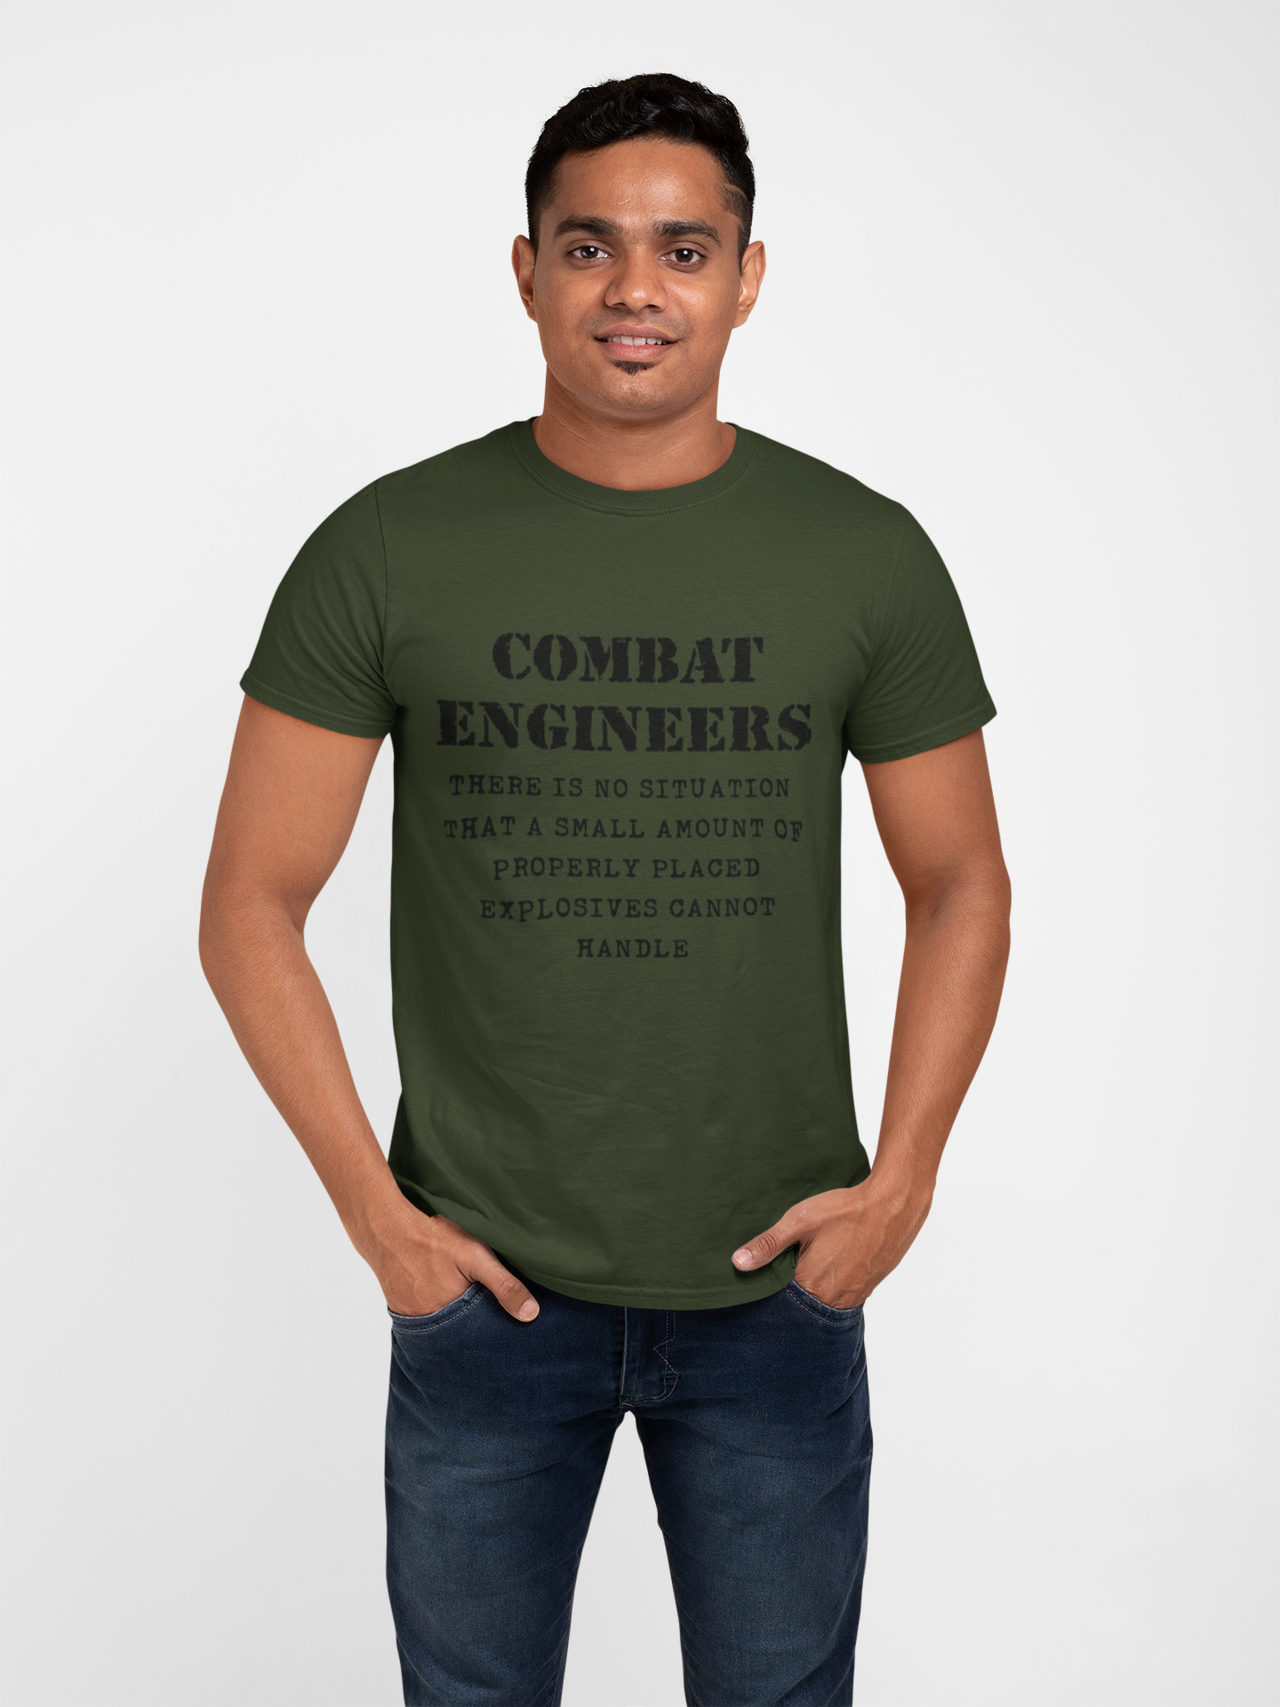 Combat Engineer T-shirt - There is no Situation..... (Men)